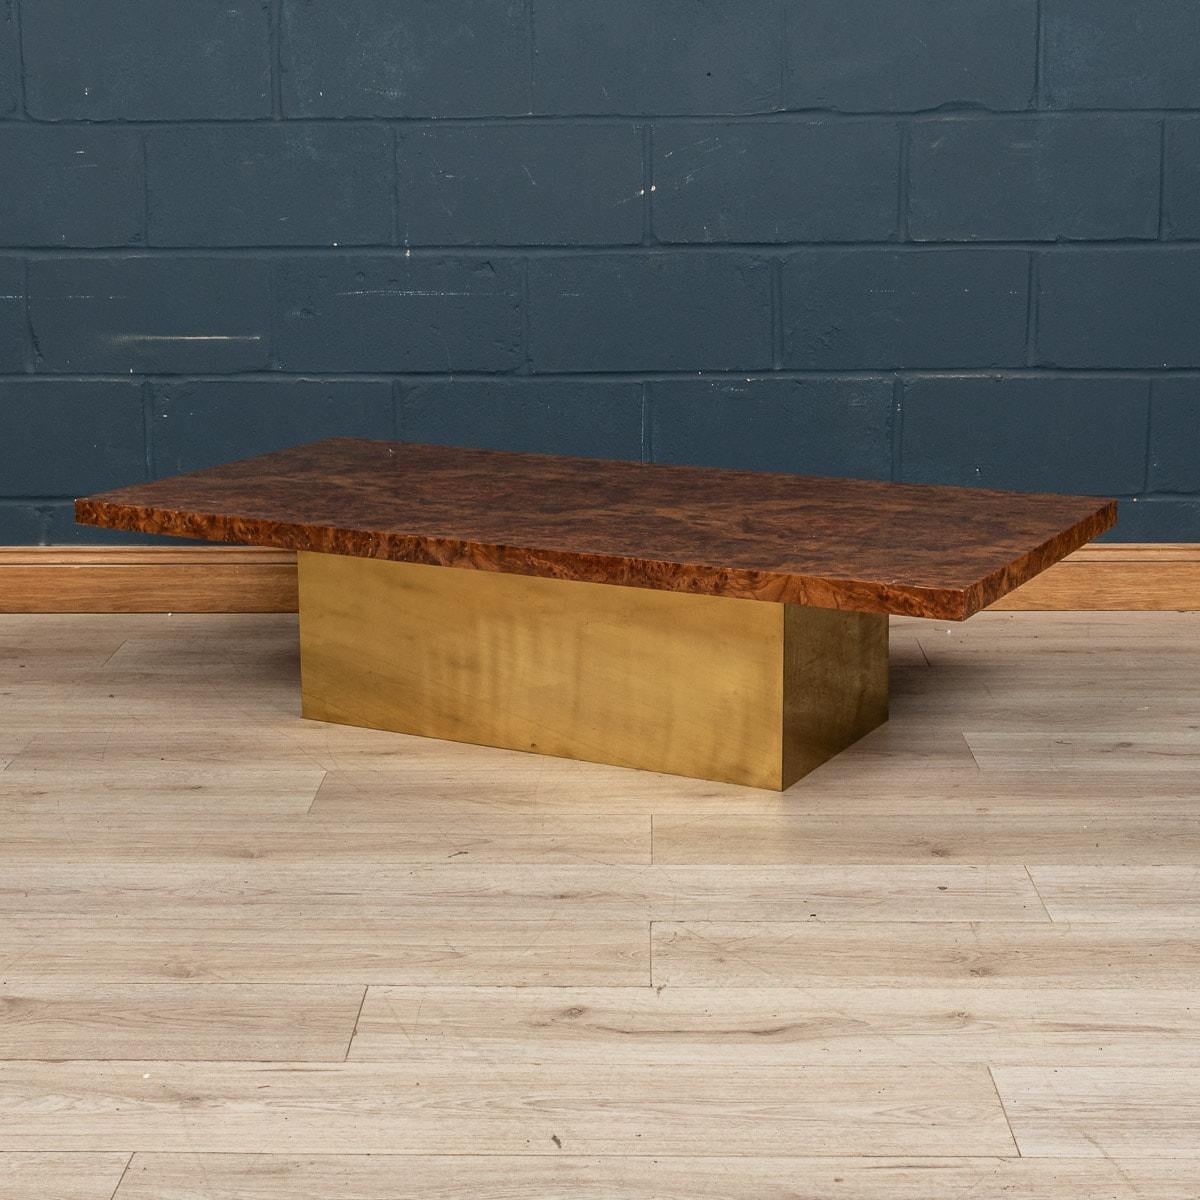 A large burled walnut veneer coffee table by Willy Rizzo, made in Italy towards the end of the 1960s to early 1970s. The clean lines and luxurious feel are characteristically Willy Rizzo and this coffee table embodies this spirit. Measuring an